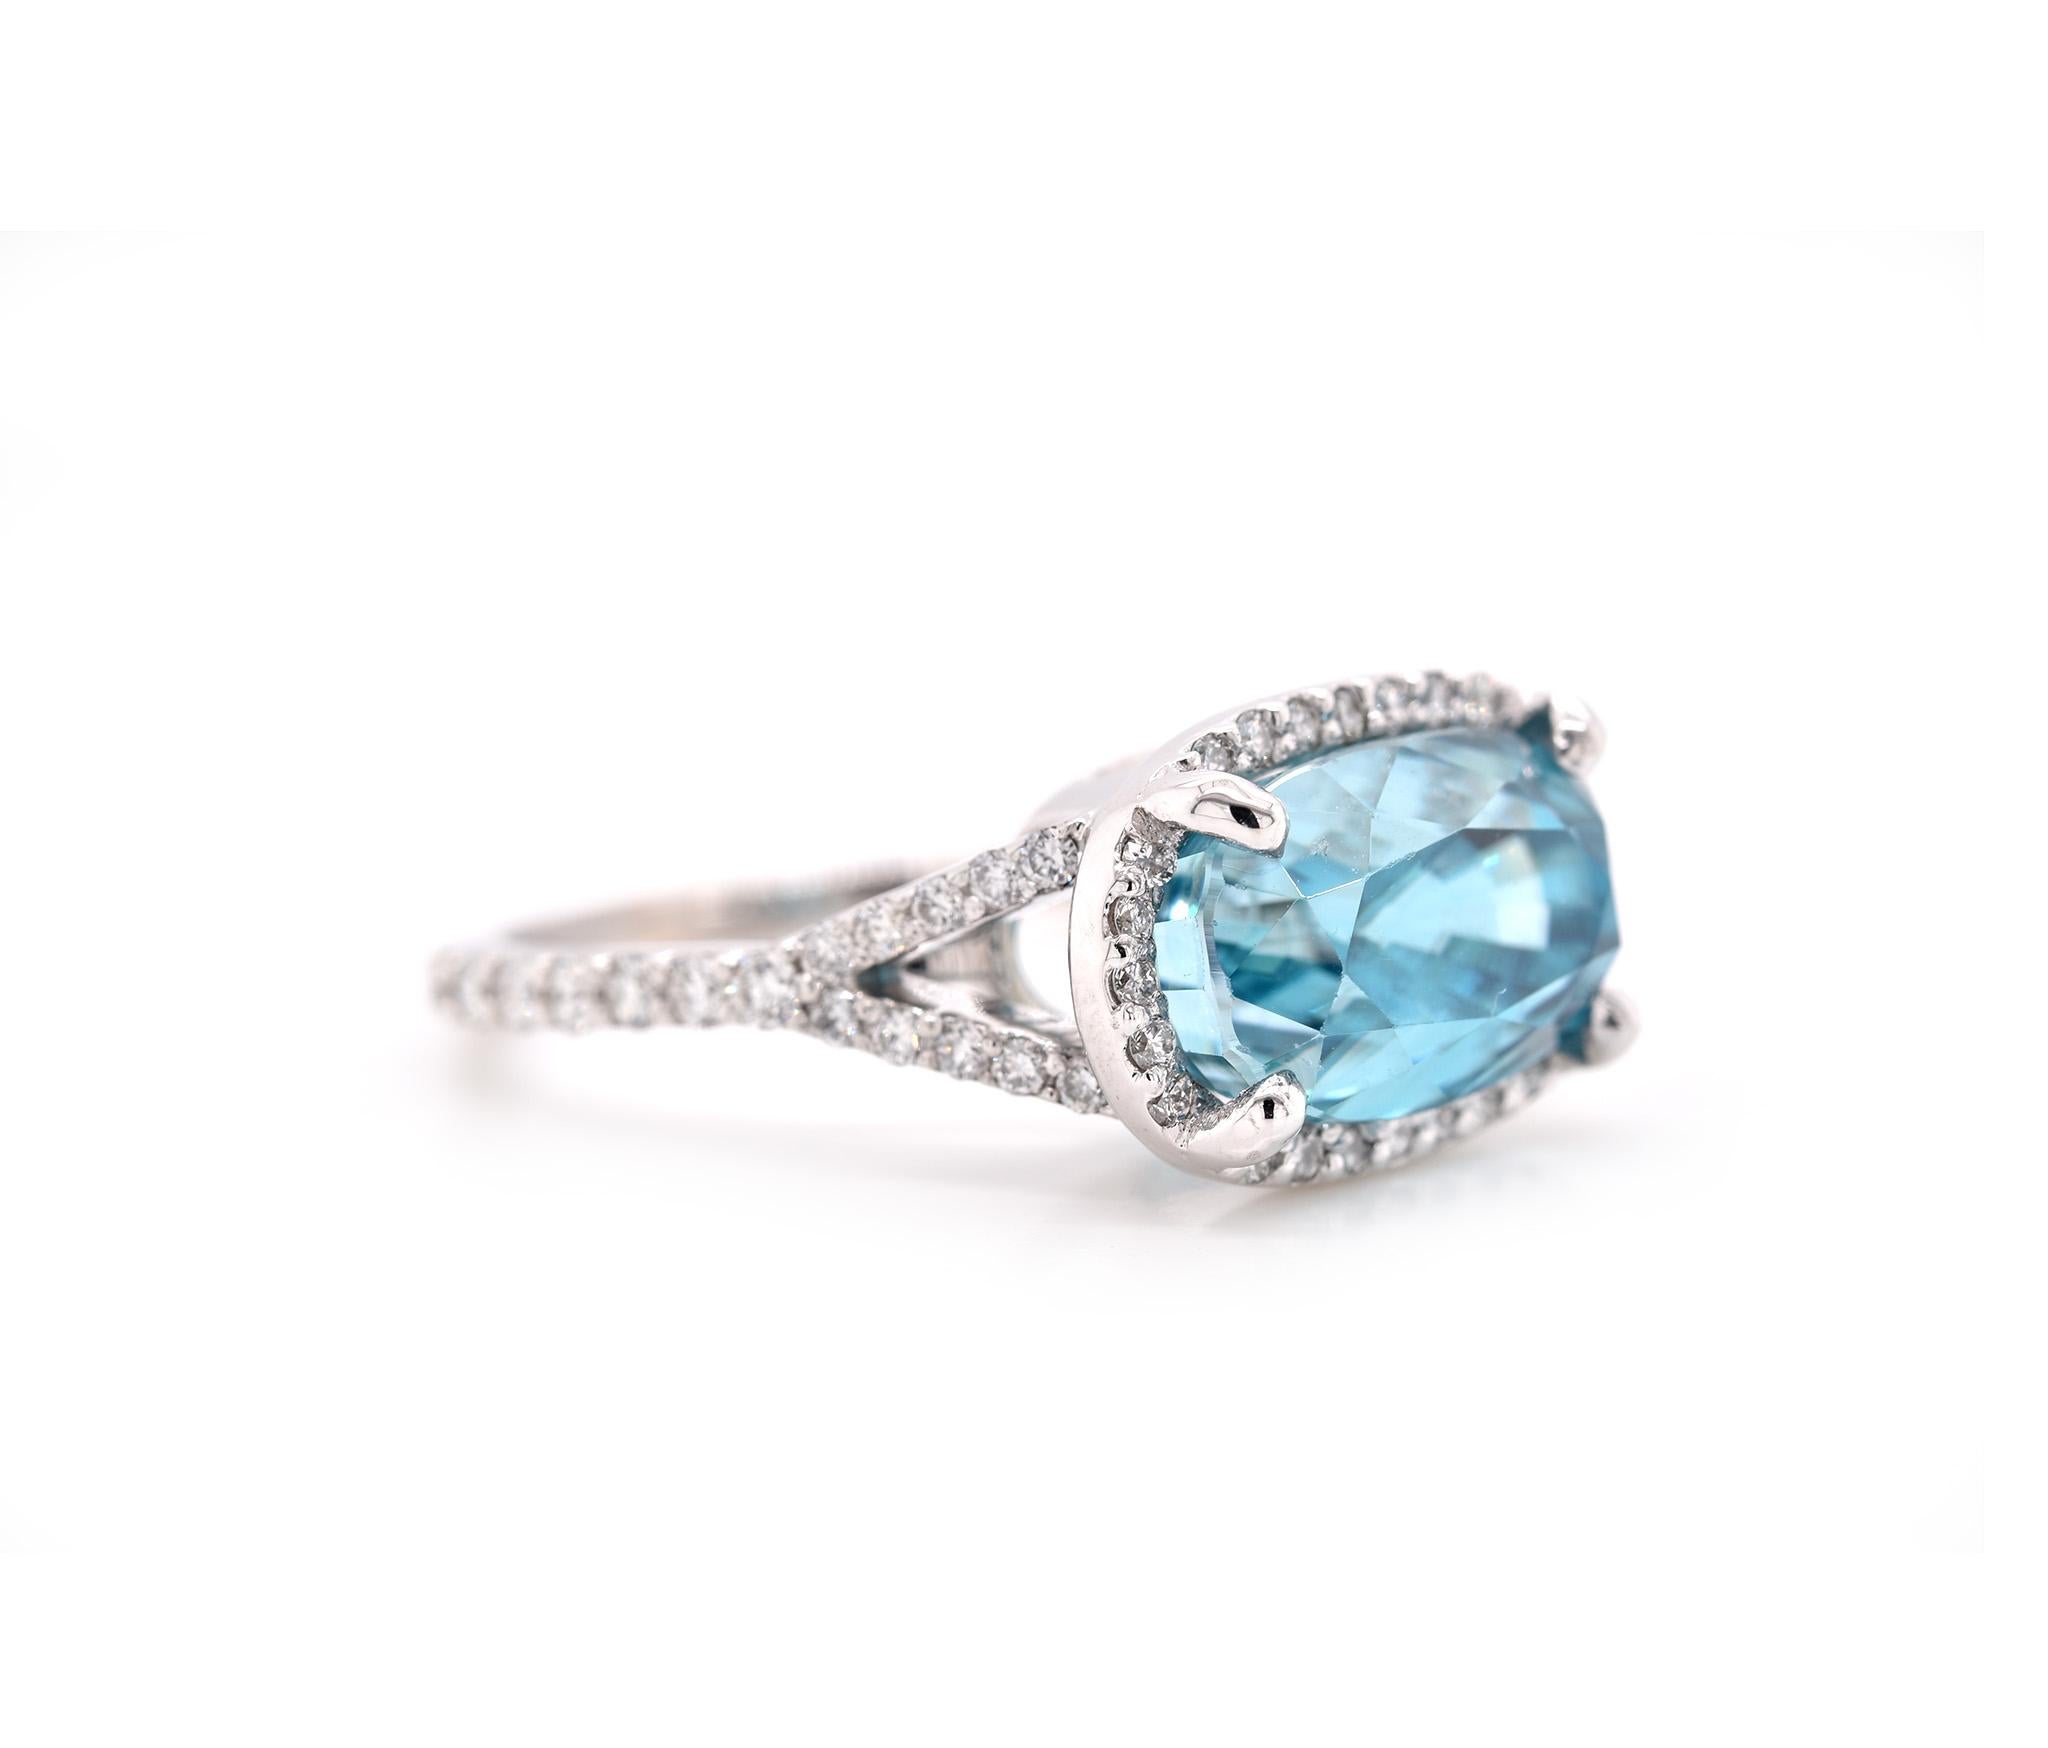 Designer: custom 
Material: 14k white gold
Zircon: 1 oval cut blue zircon = 10.09ct
Diamonds: 58 round brilliant cuts = 0.67cttw
Color: G	
Clarity: VS
Ring Size: 7 ¼ (please allow two additional shipping days for sizing requests)
Dimensions: ring